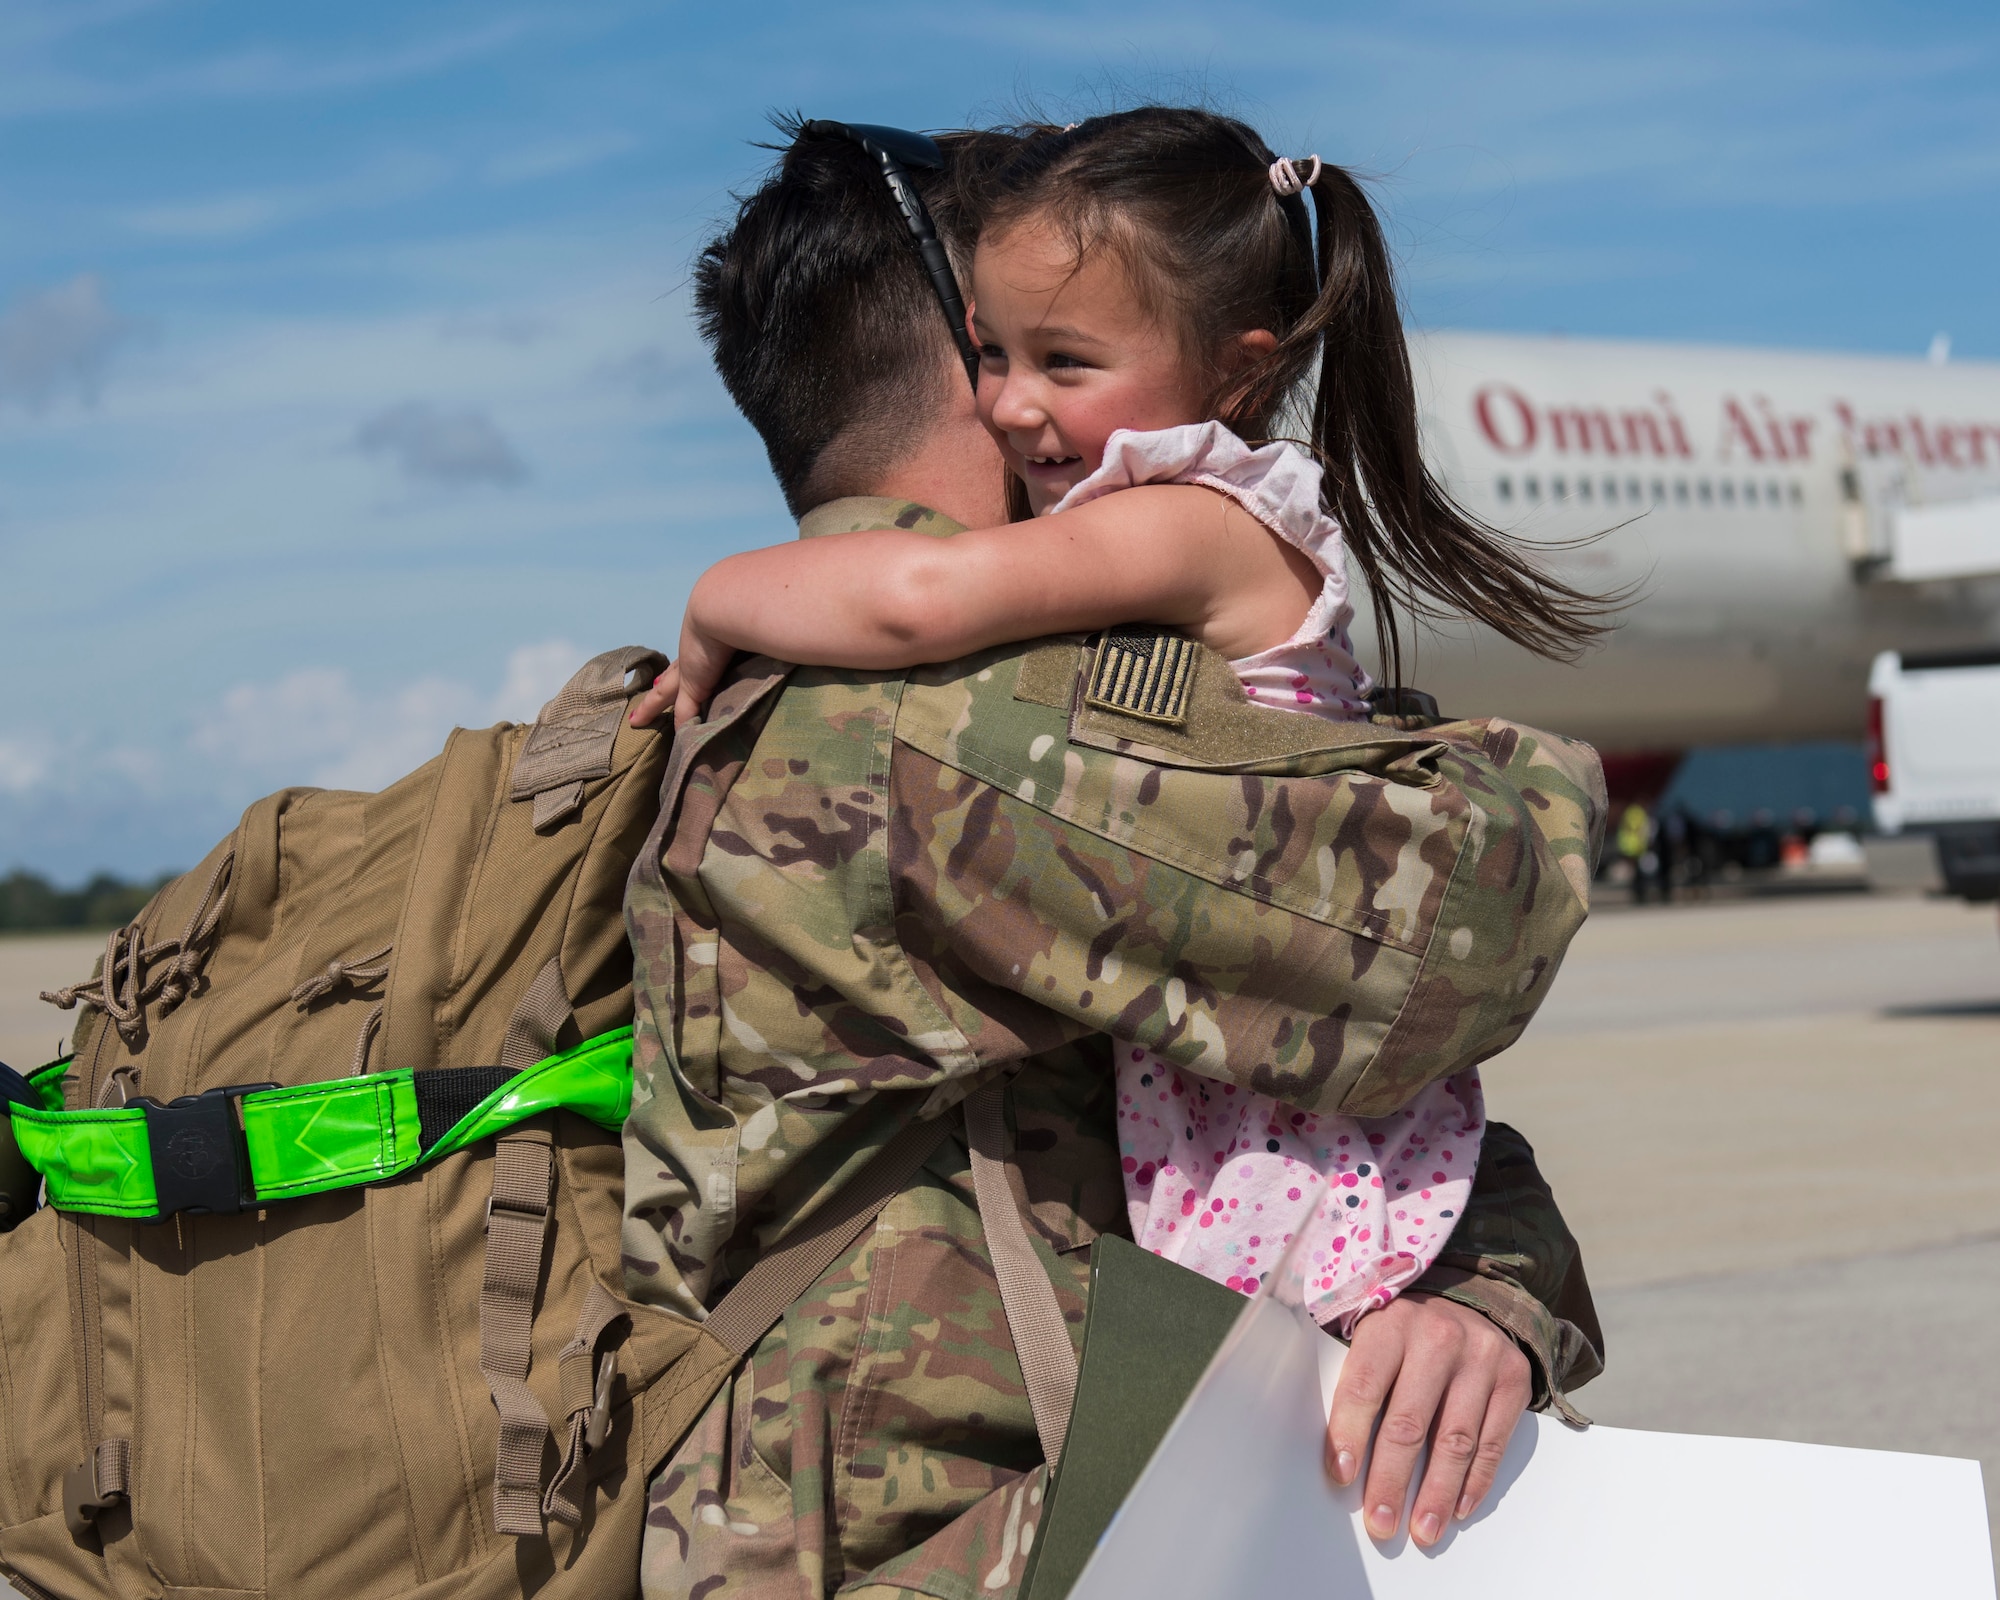 U.S. Air Force Senior Airman Matthew Adams, 1st Maintenance Squadron low observable technician, hugs his daughter, Lilly, 4, at Joint Base Langley-Eustis, Virginia, Oct. 9, 2018.